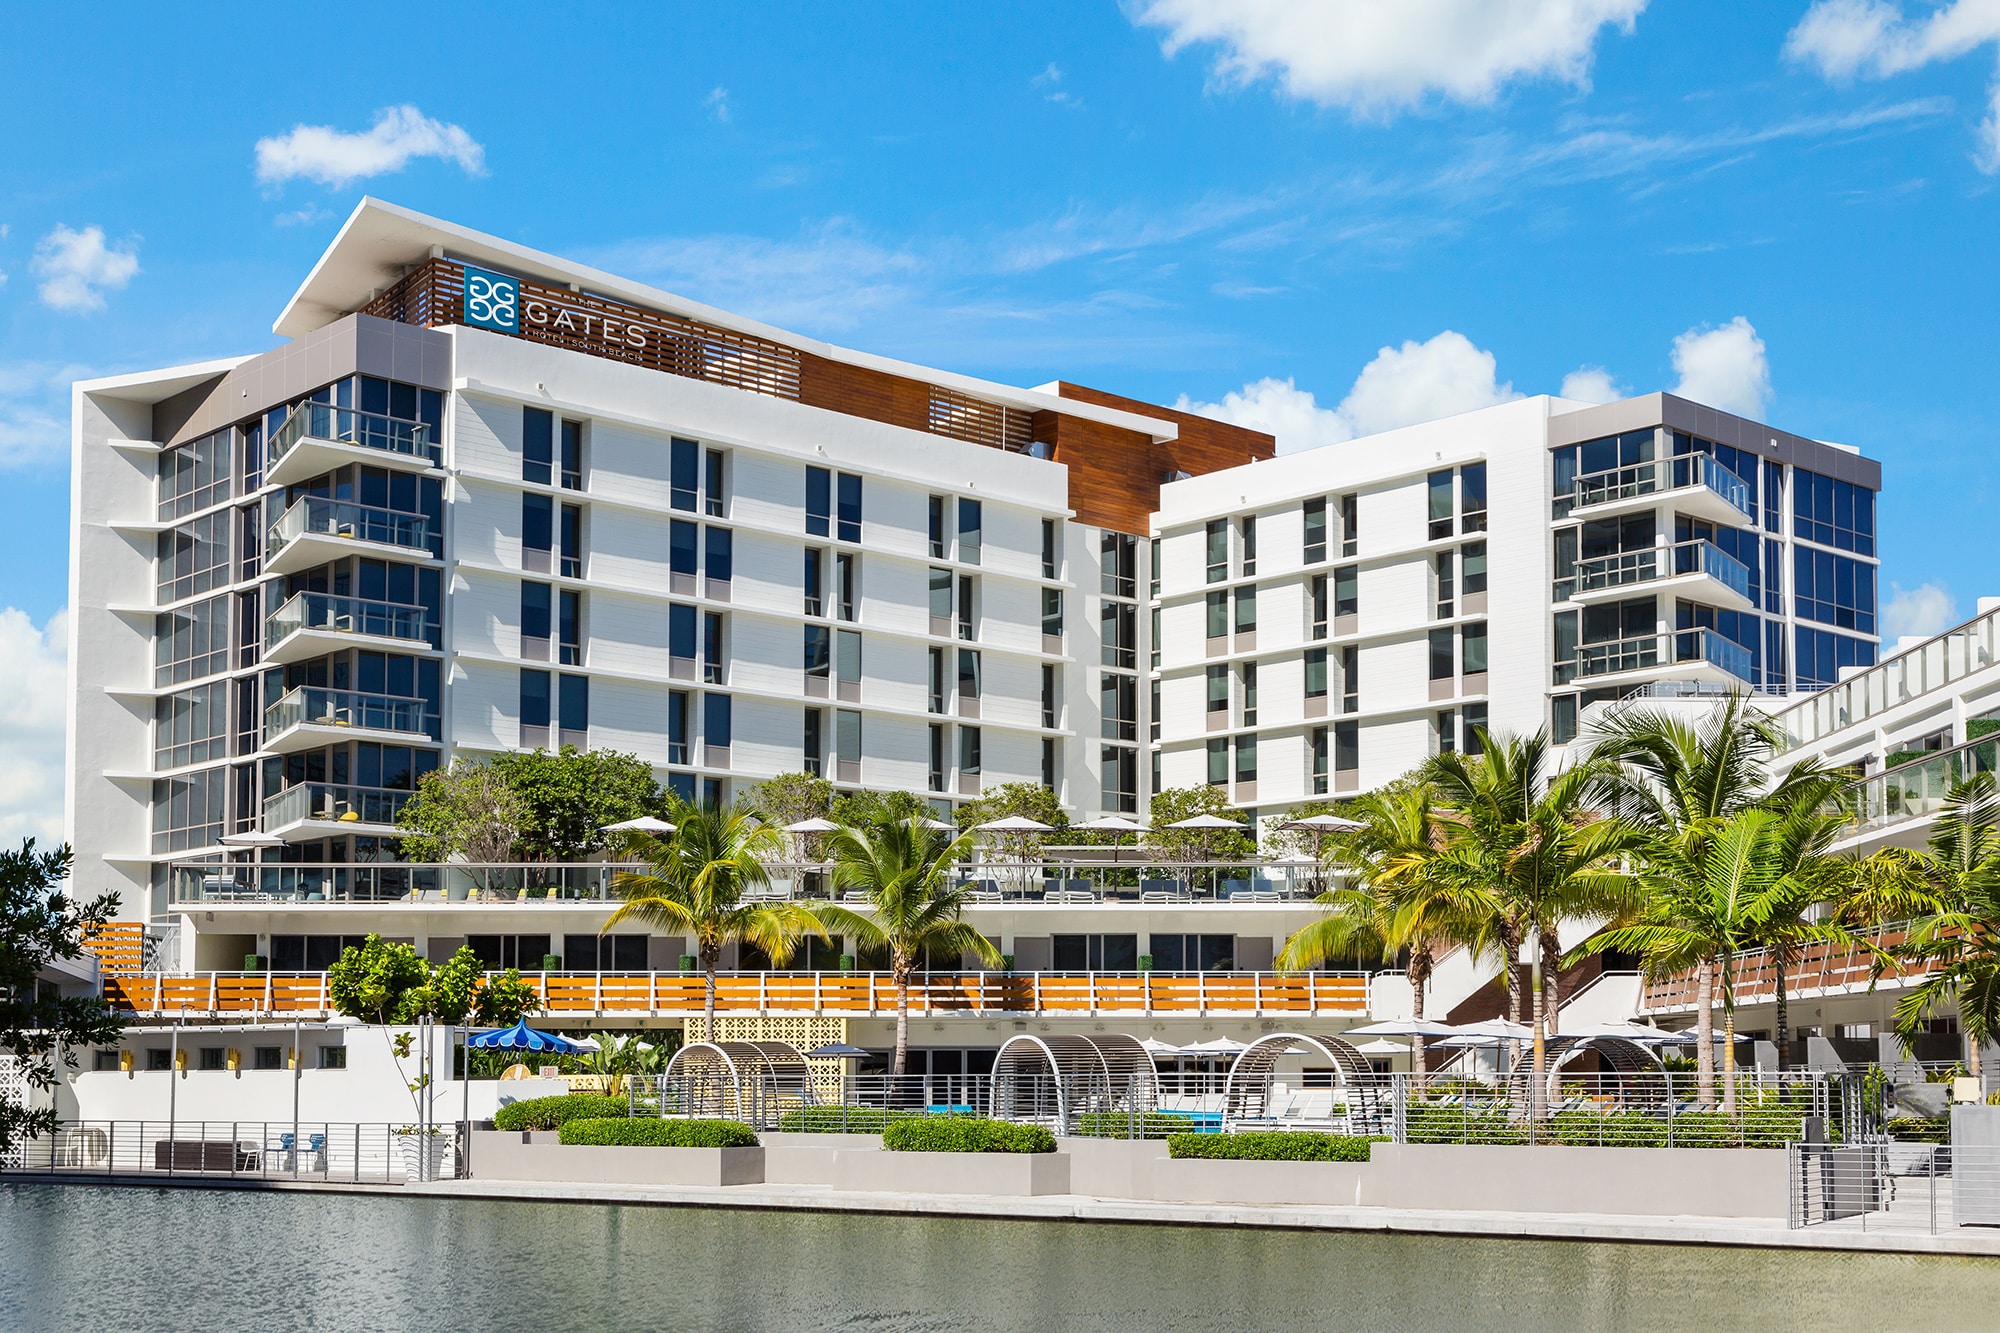 Spring Break Packages: The Gates Hotel South Beach